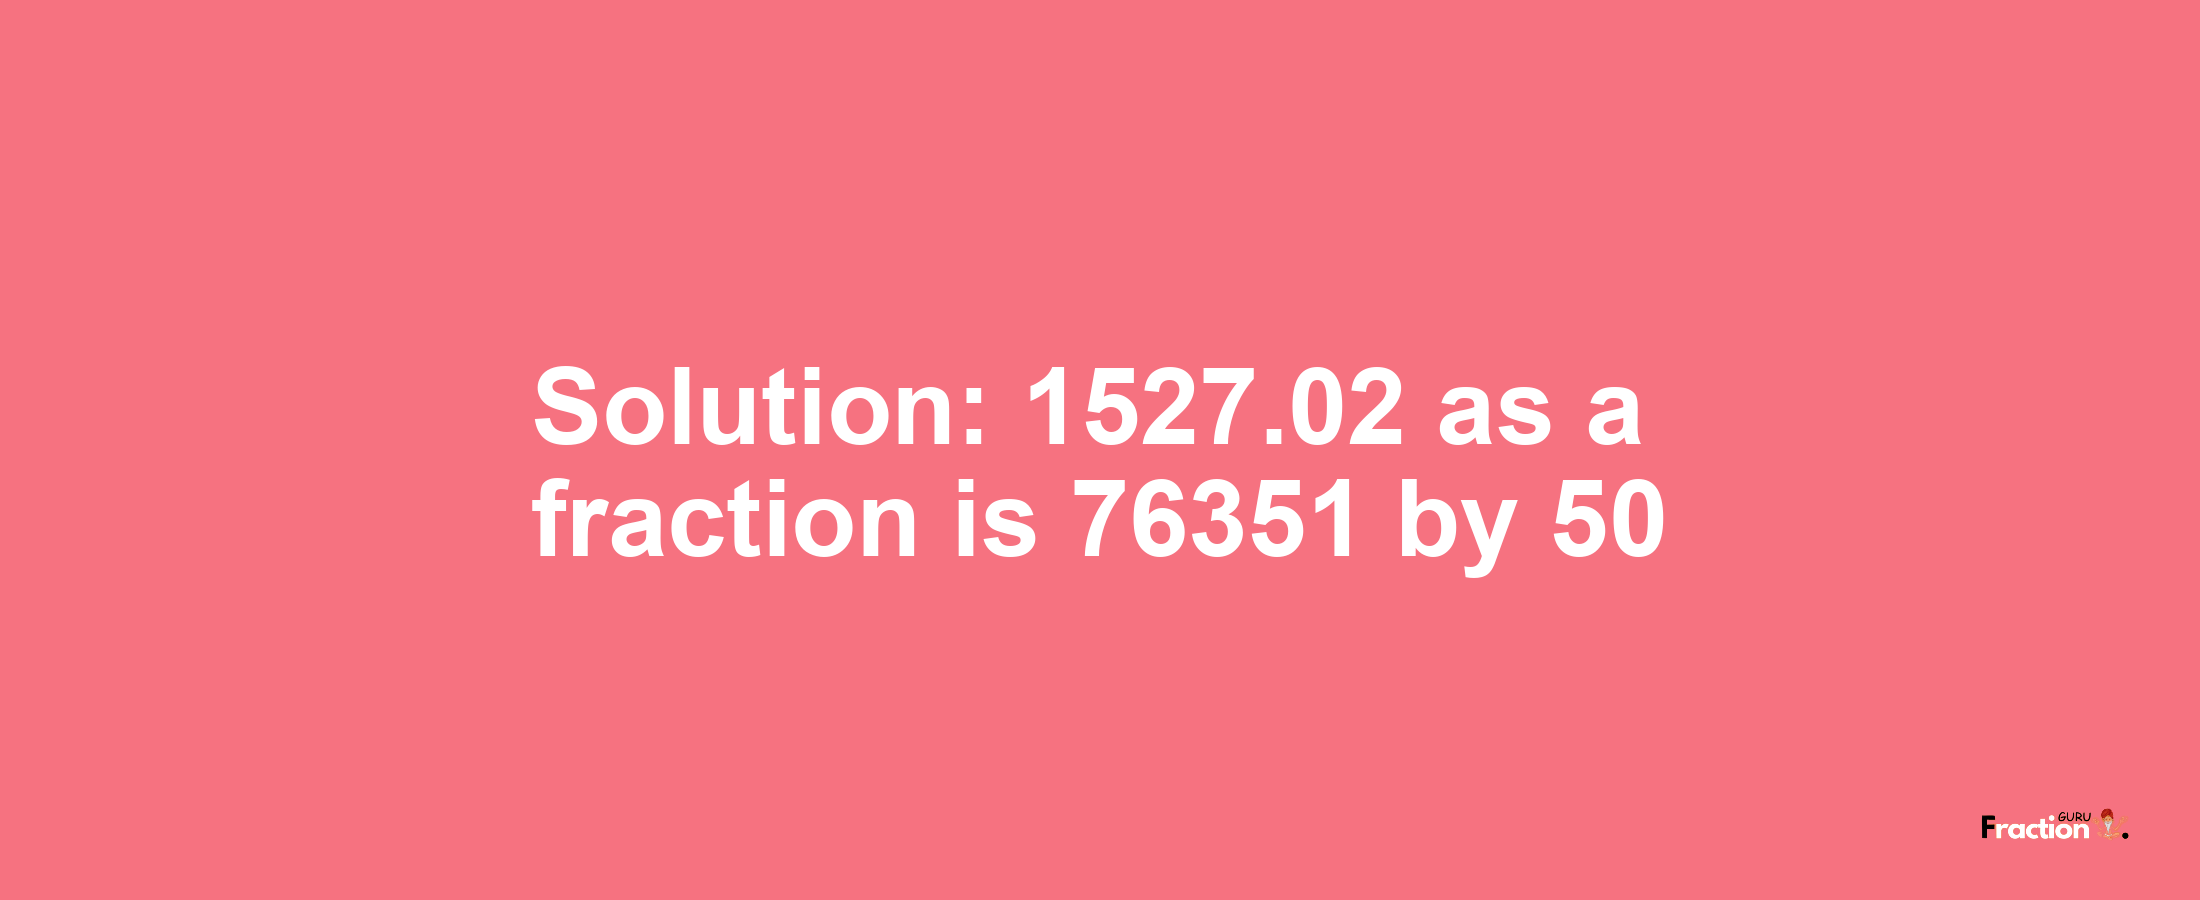 Solution:1527.02 as a fraction is 76351/50